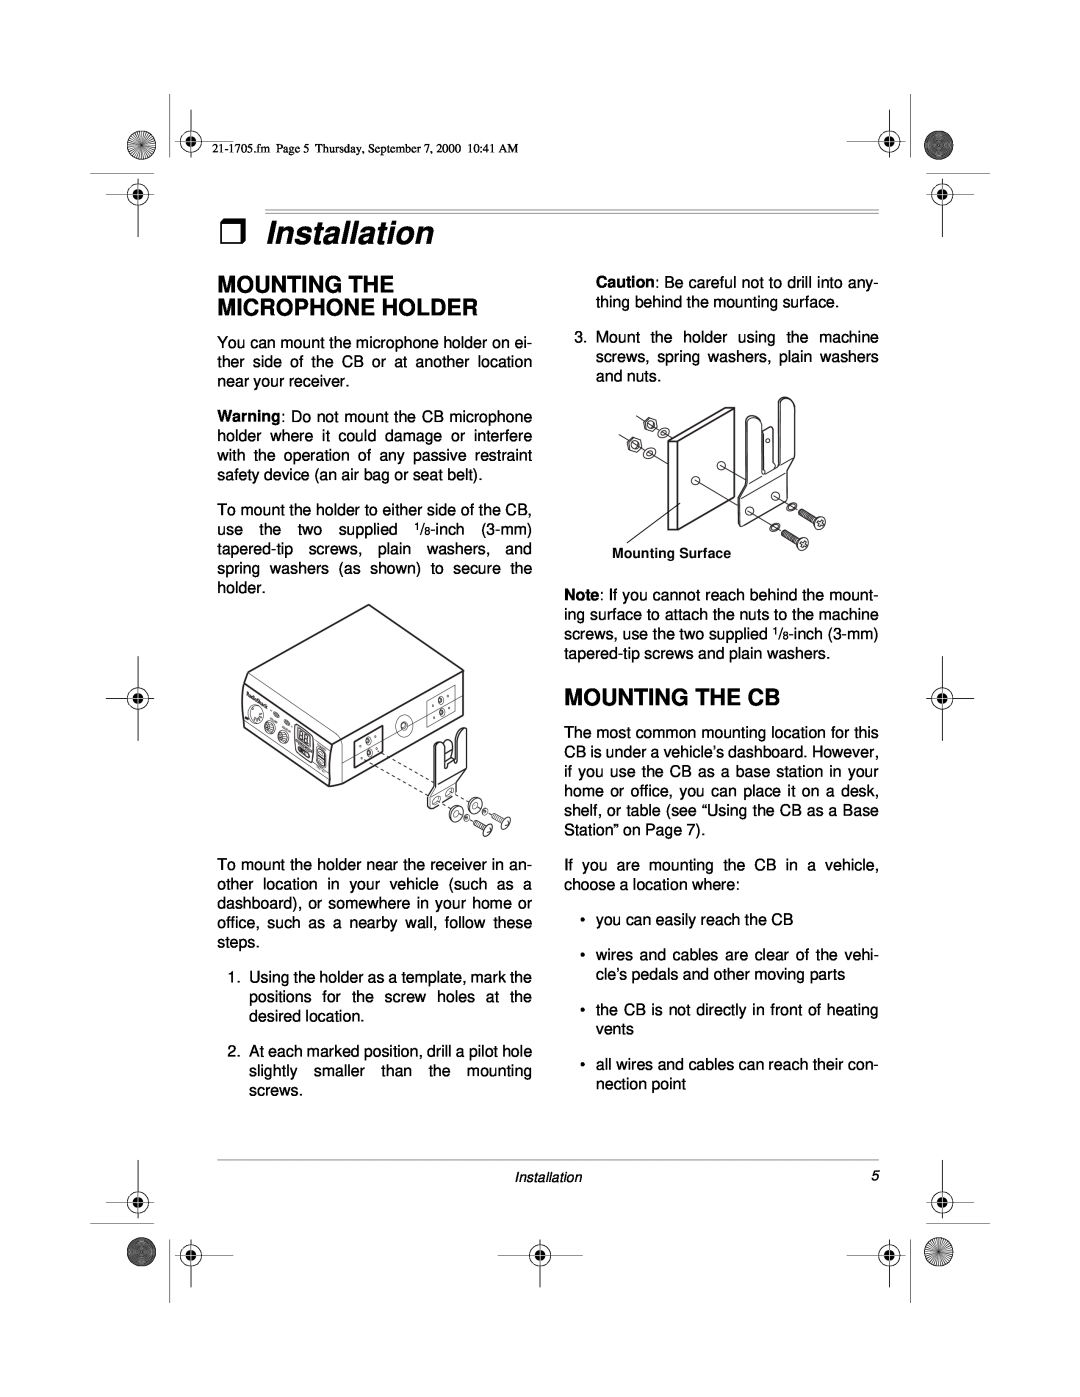 Radio Shack TRC-511 owner manual ˆInstallation, Mounting The Microphone Holder, Mounting The Cb 